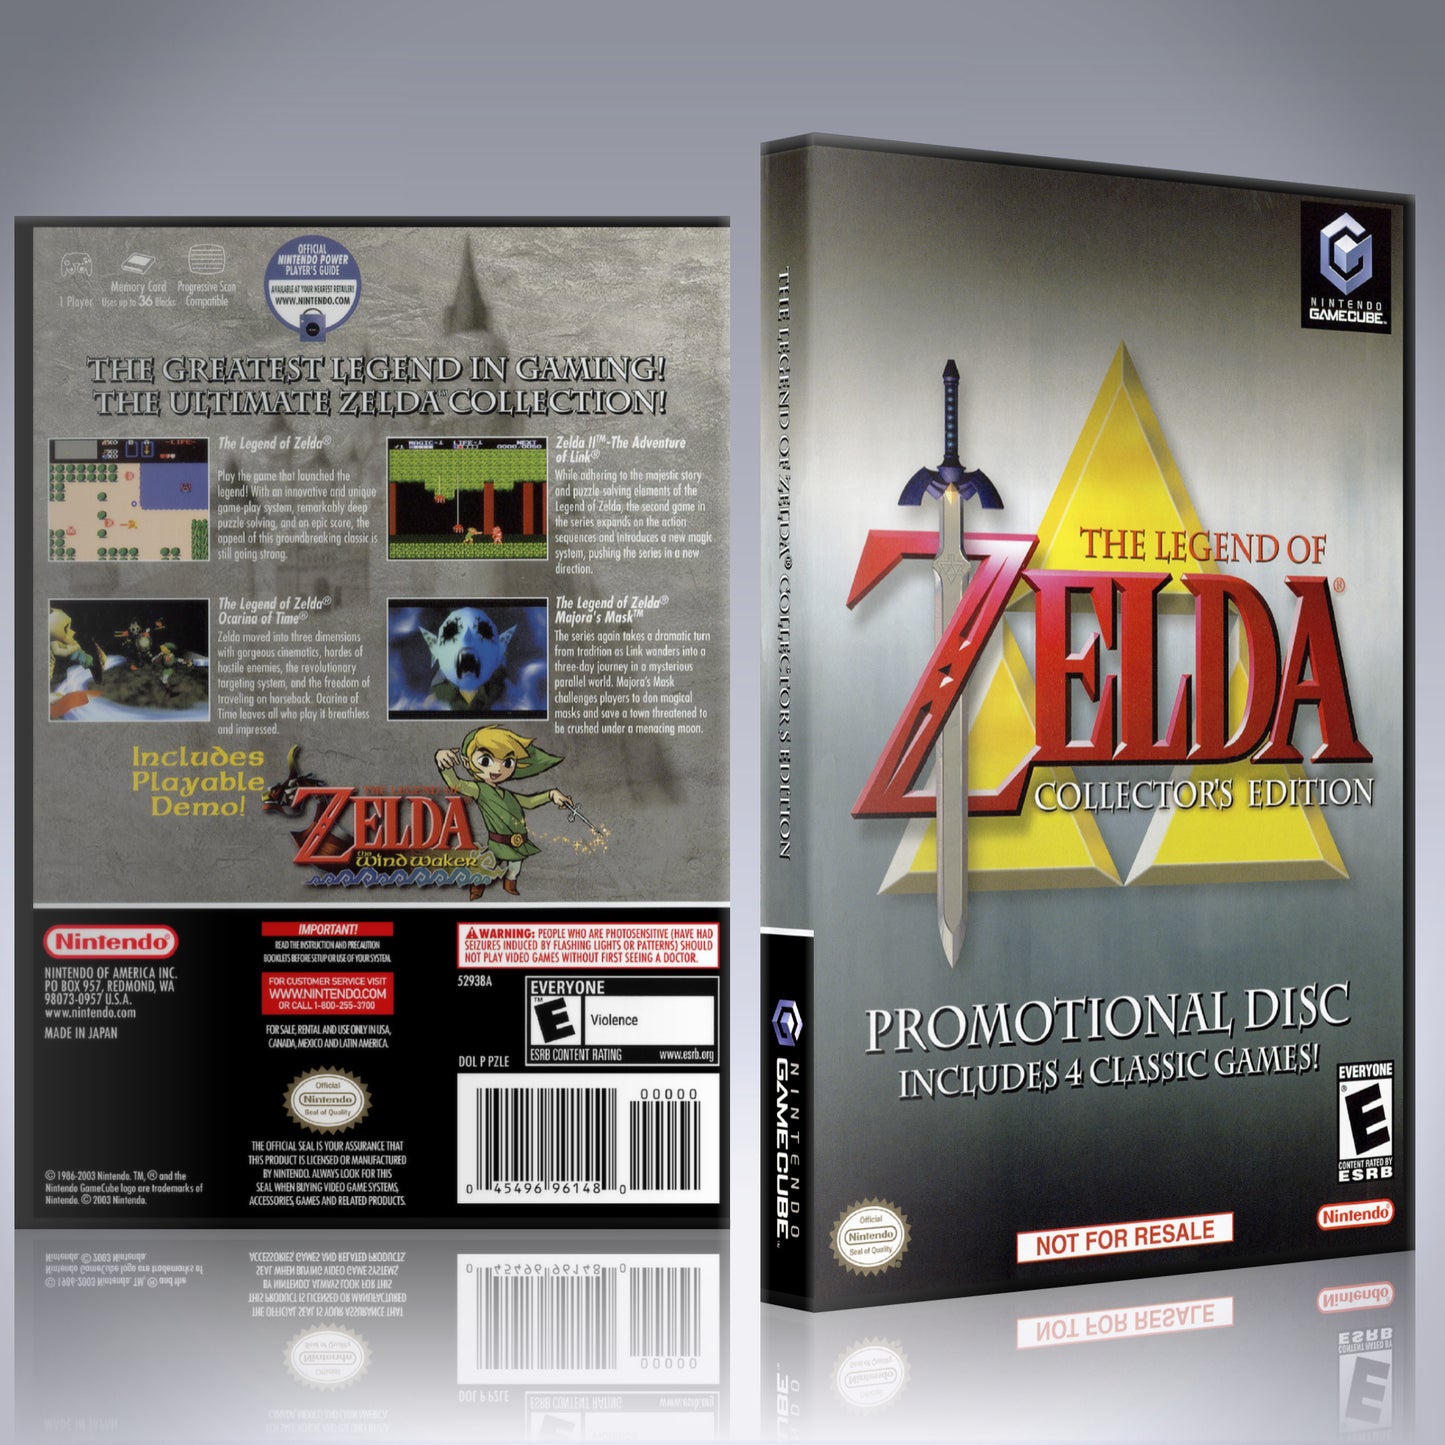 GameCube Replacement Case - NO GAME - Legend of Zelda - Collector's Edition